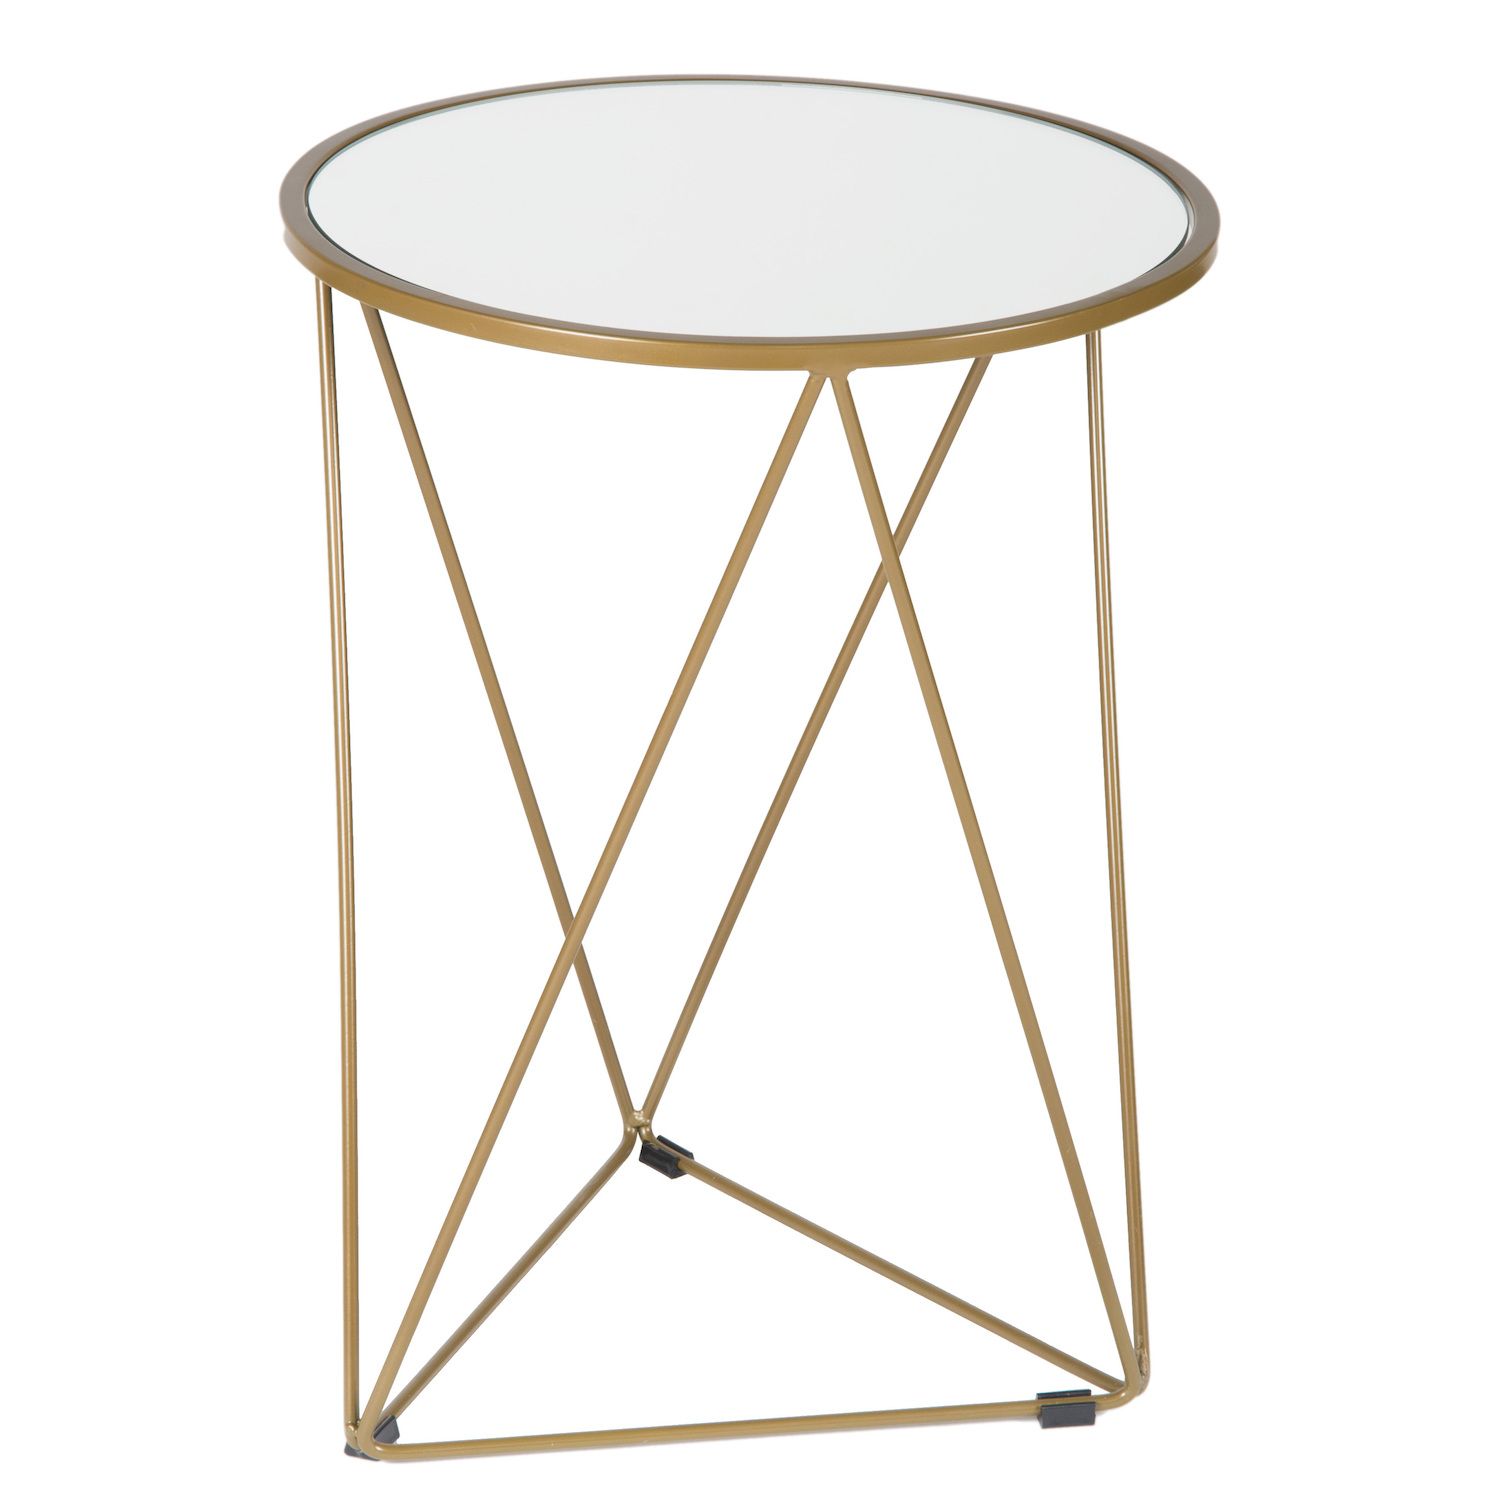 Image for HomePop Geometric Gold Finish End Table at Kohl's.